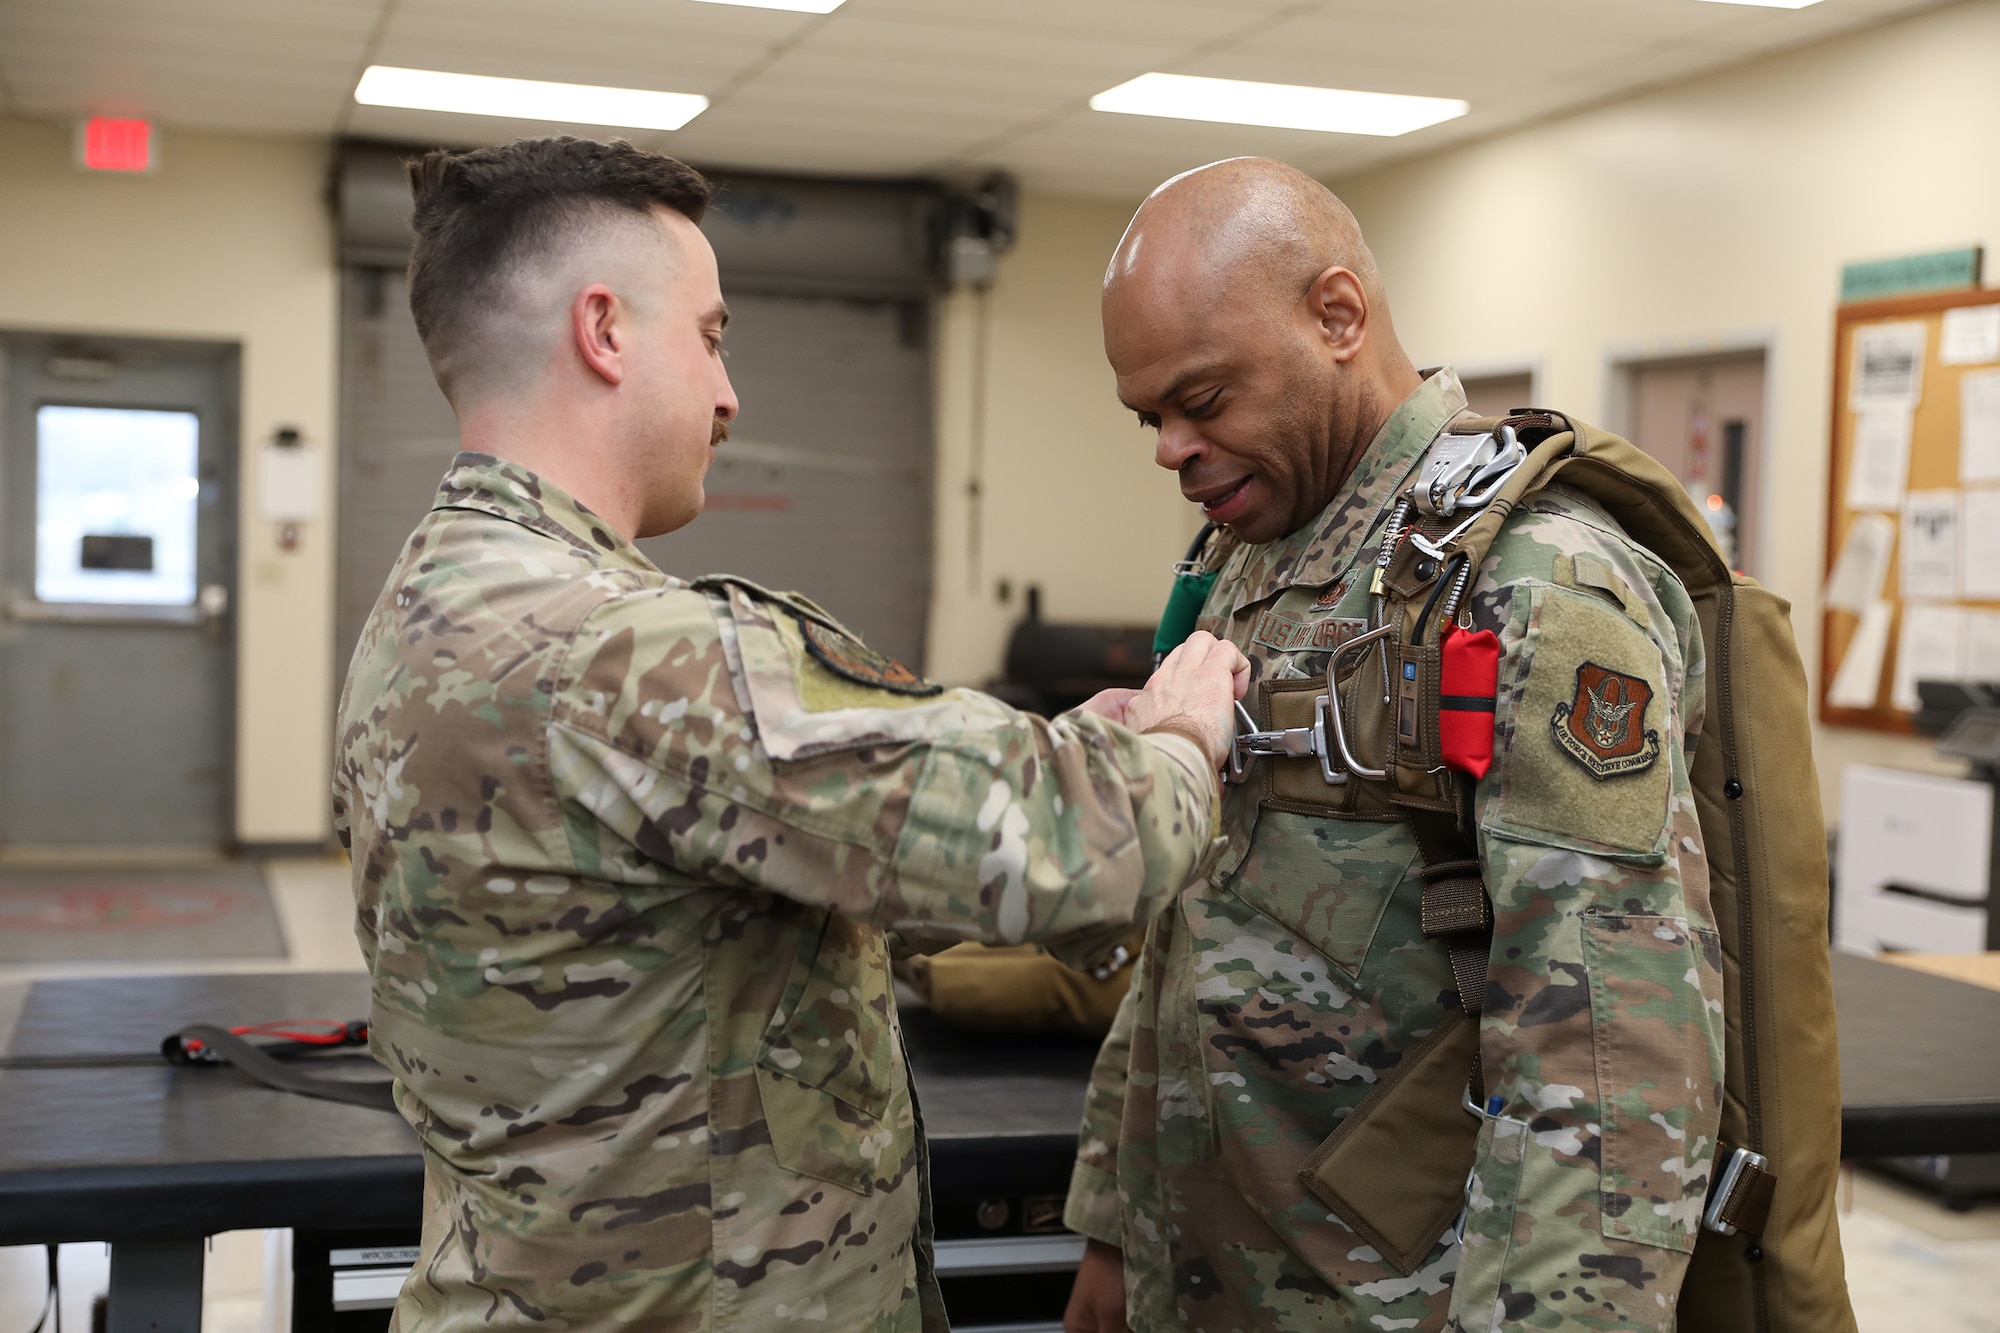 Tech. Sgt. Nathan Pritchard, 445th Operations Support Squadron Survival, Evasion, Resistance and Escape (SERE) instructor, helps Chief Master Sgt. Travon W. Dennis, Fourth Air Force Command Chief, March Air Reserve Base, California, try on a parachute during his visit with 445th OSS Airmen Jan. 7, 2024. Chief Dennis visited the 445th Airlift Wing Jan. 6-7, 2024 and met with Airmen from various squadrons and the 445th Development and Training Flight, he toured the 445th Aeromedical Staging Squadron simulation lab, participated in an aircrew flight equipment demonstration and was briefed on the security forces weapons simulator training. Chief Dennis also met with the 445th's Chief’s Group, Rising Six and First Sergeant Council. (U.S. Air Force photo/Senior Airman Angela Jackson)